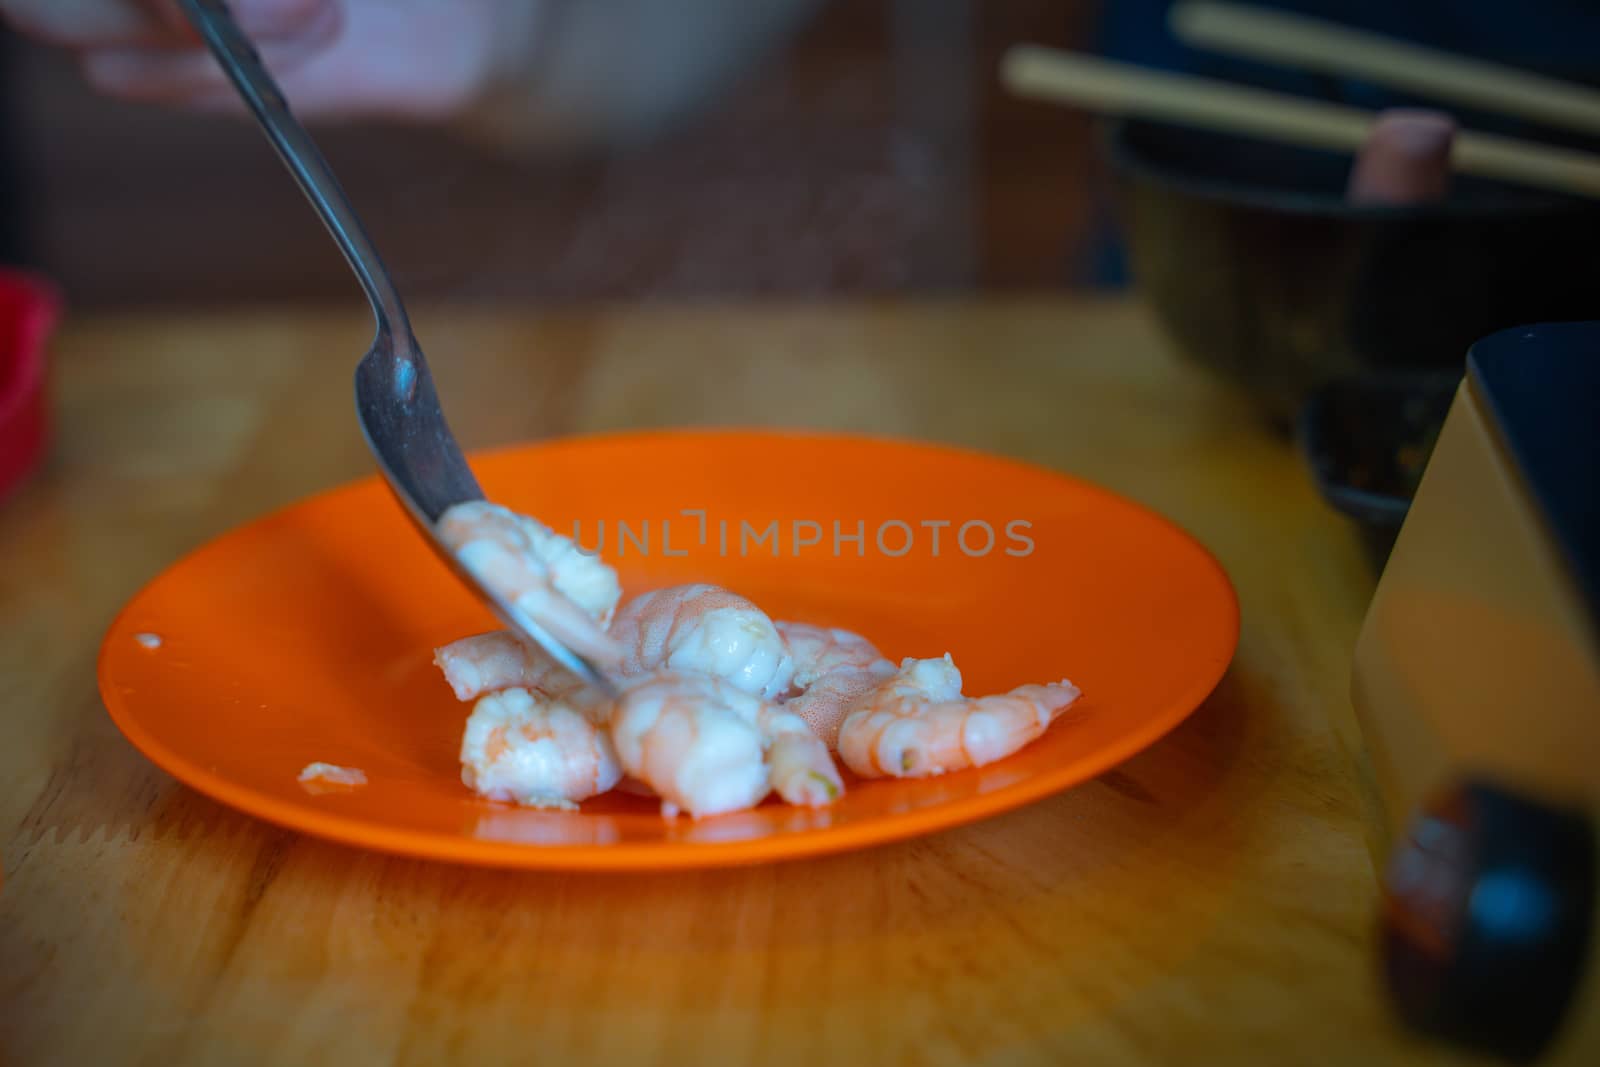 The Raw whole fresh uncooked prawns shrimps on stone red plate